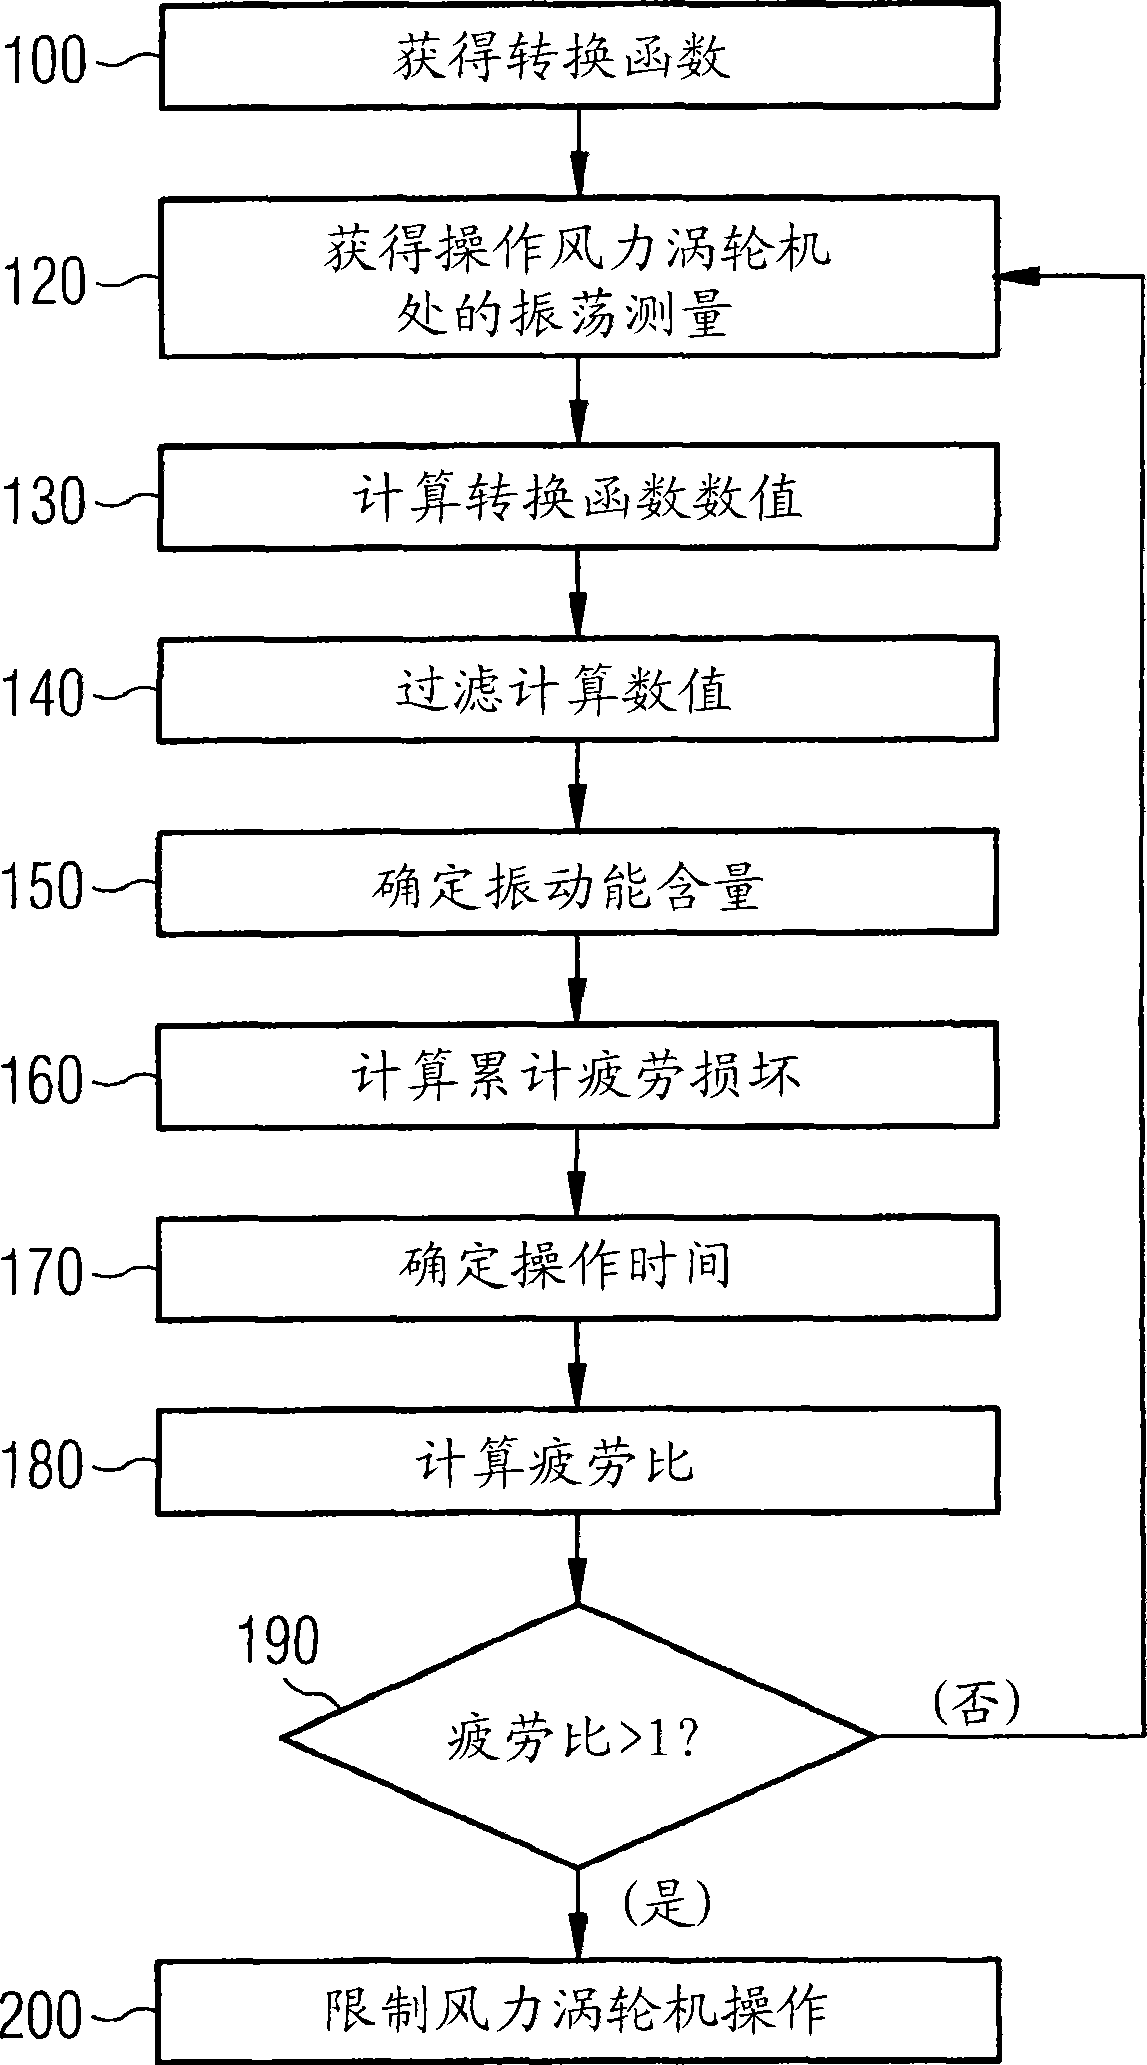 Method for determining fatigue load of a wind turbine and for fatigue load control, and wind turbines therefor